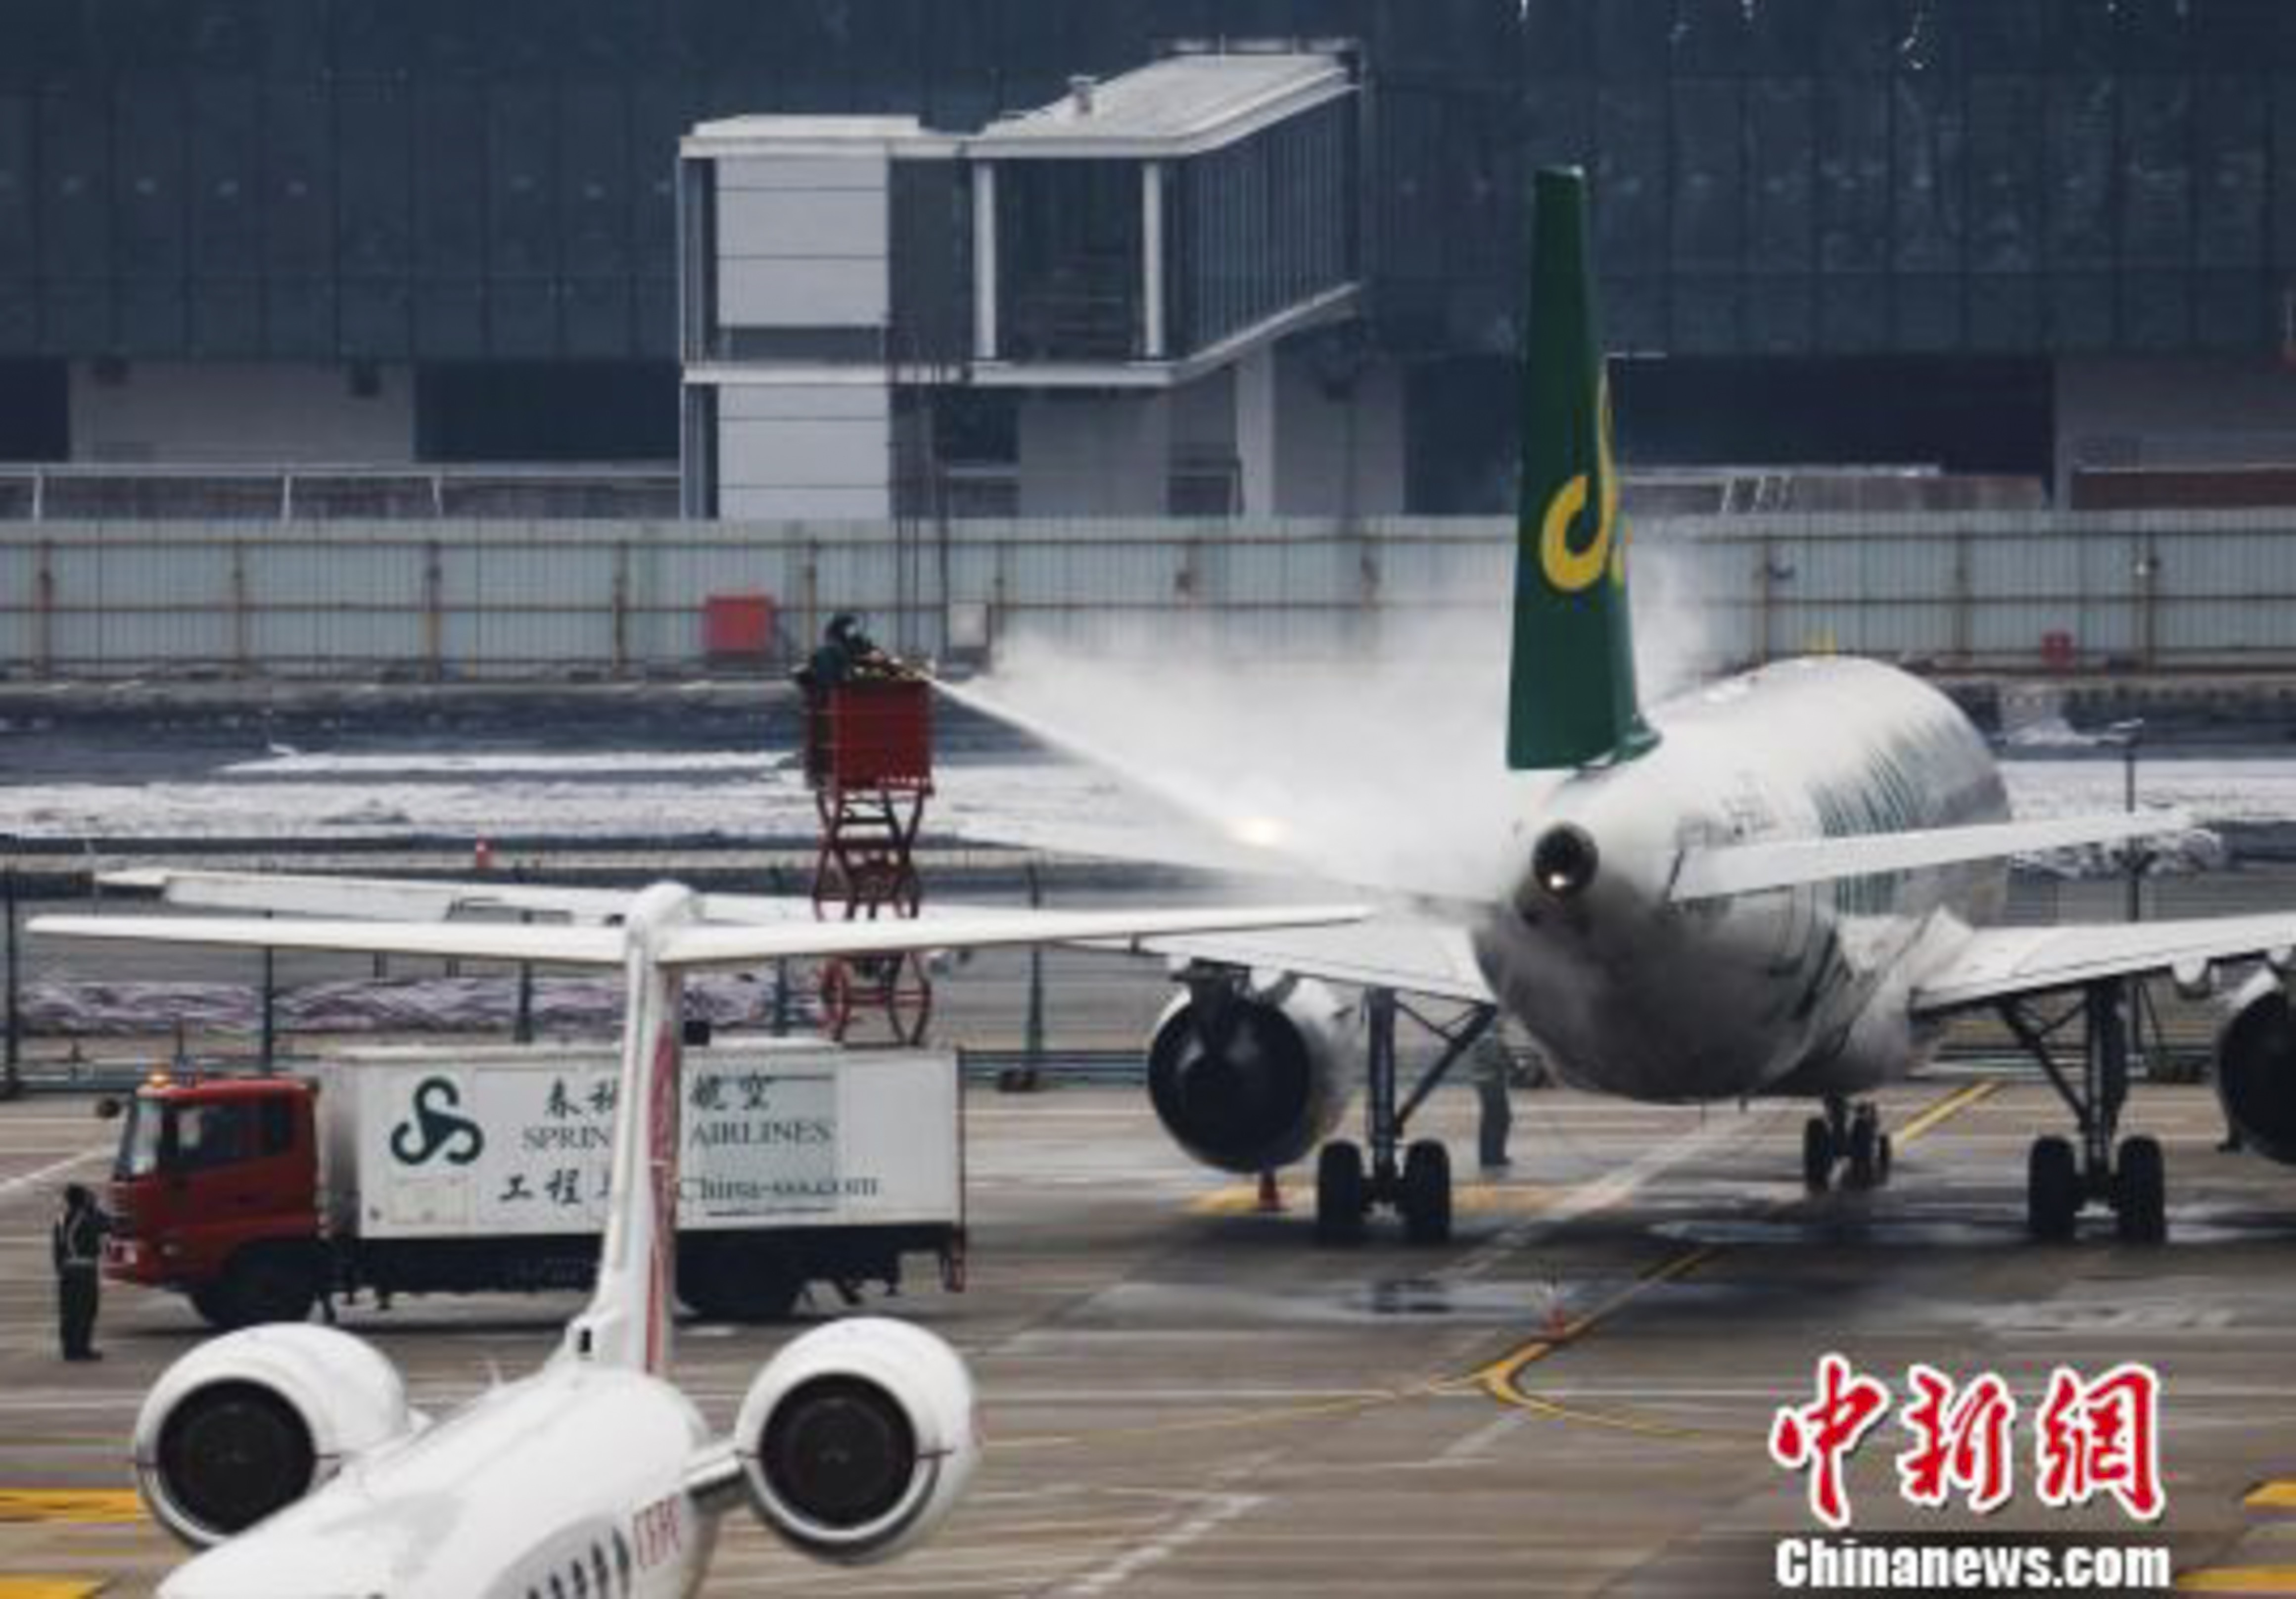 Shanghai’s international airport are at the ready for low temperatures. Photo: China News Service